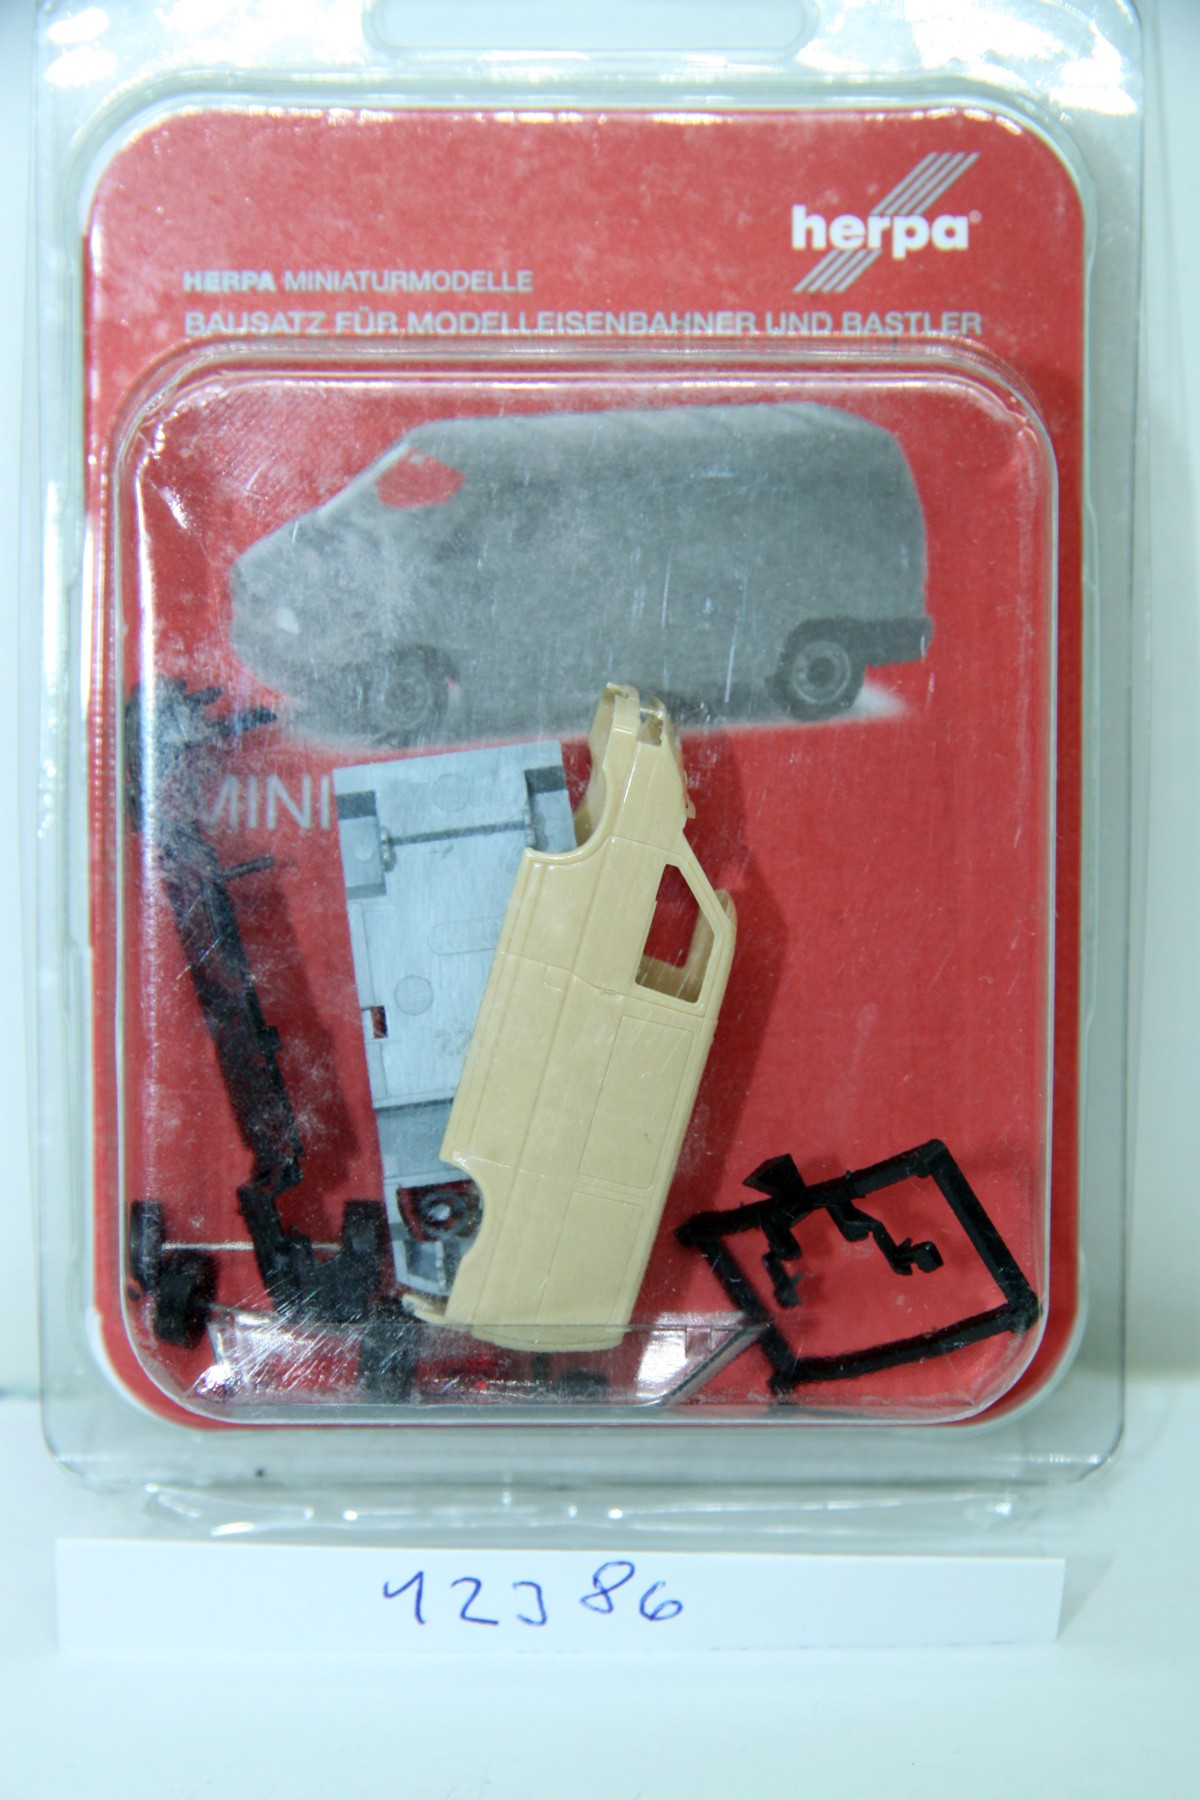 Herpa 012386, VW T4 box, with original packaging.